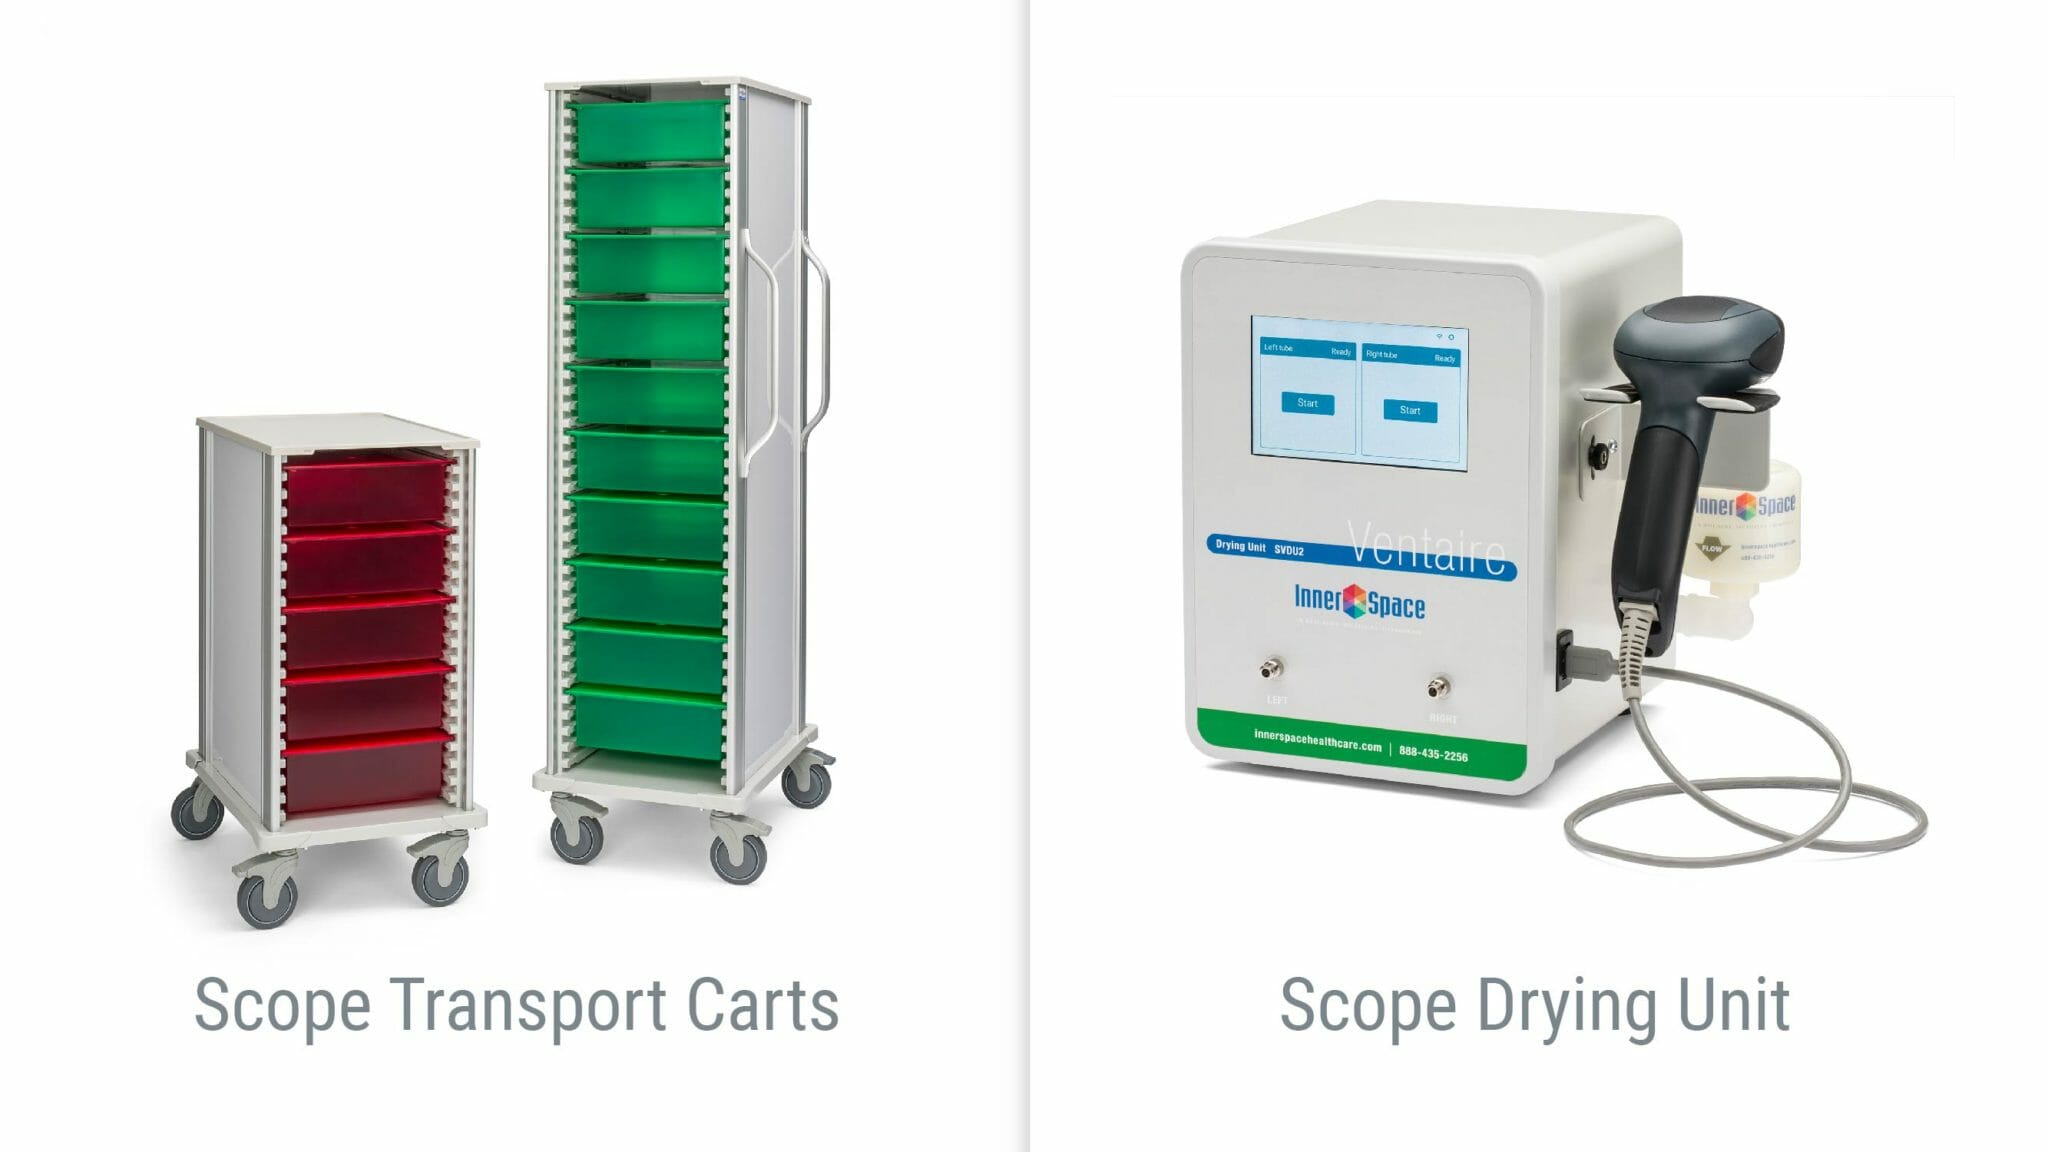 Ventaire Endoscopy System - Scope Drying Unit and Scope Transport Carts